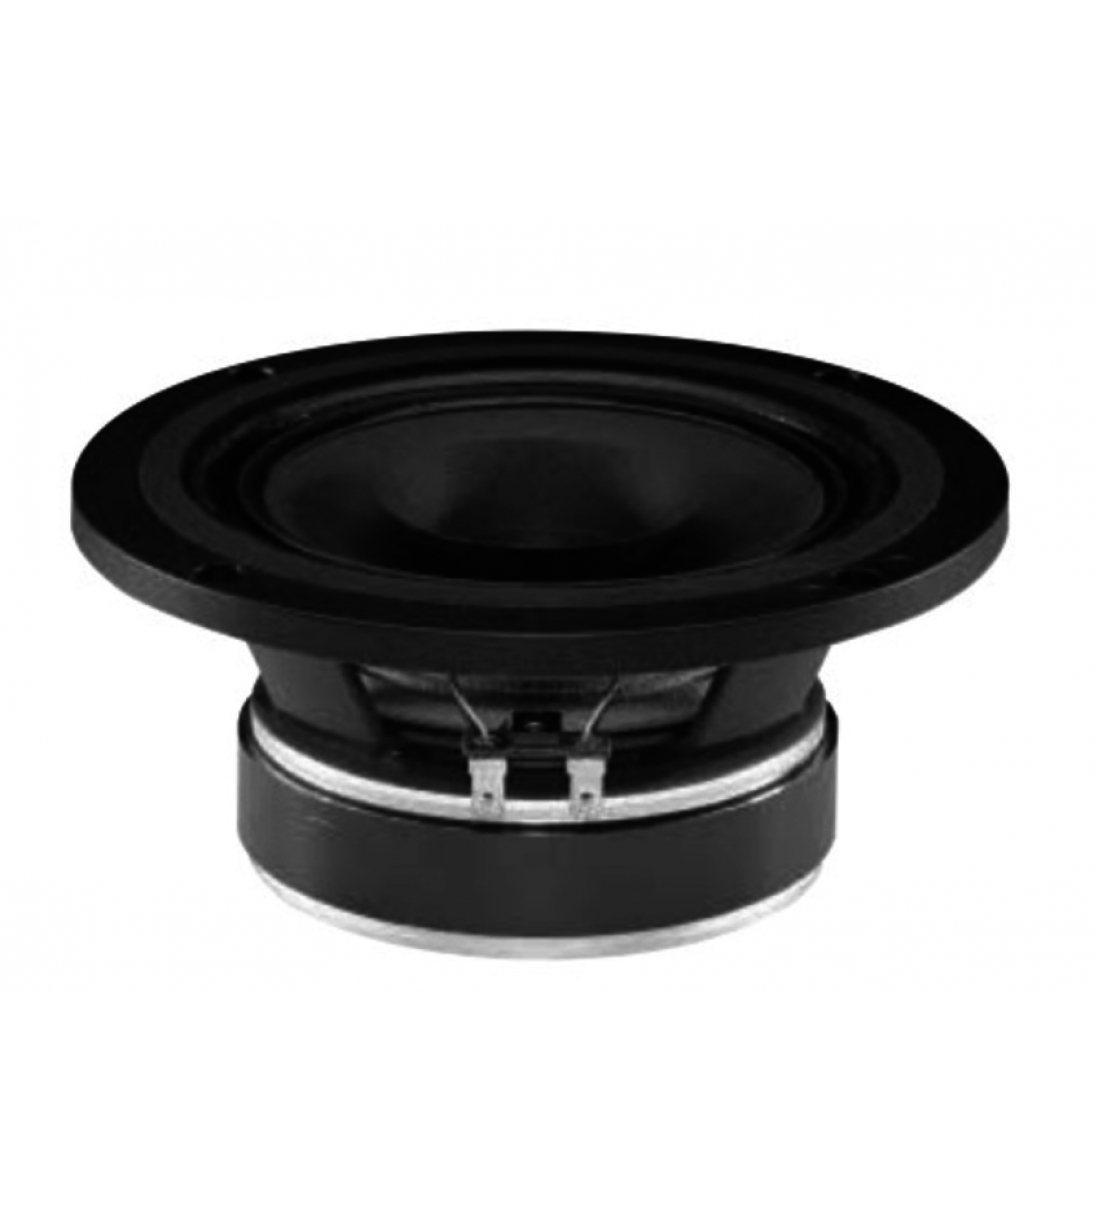 6XT13 LF Drivers 6.5 inches • Nominal Diameter: 170 mm (6.5 in.) • Nominal Impedance: 8 Ohm 